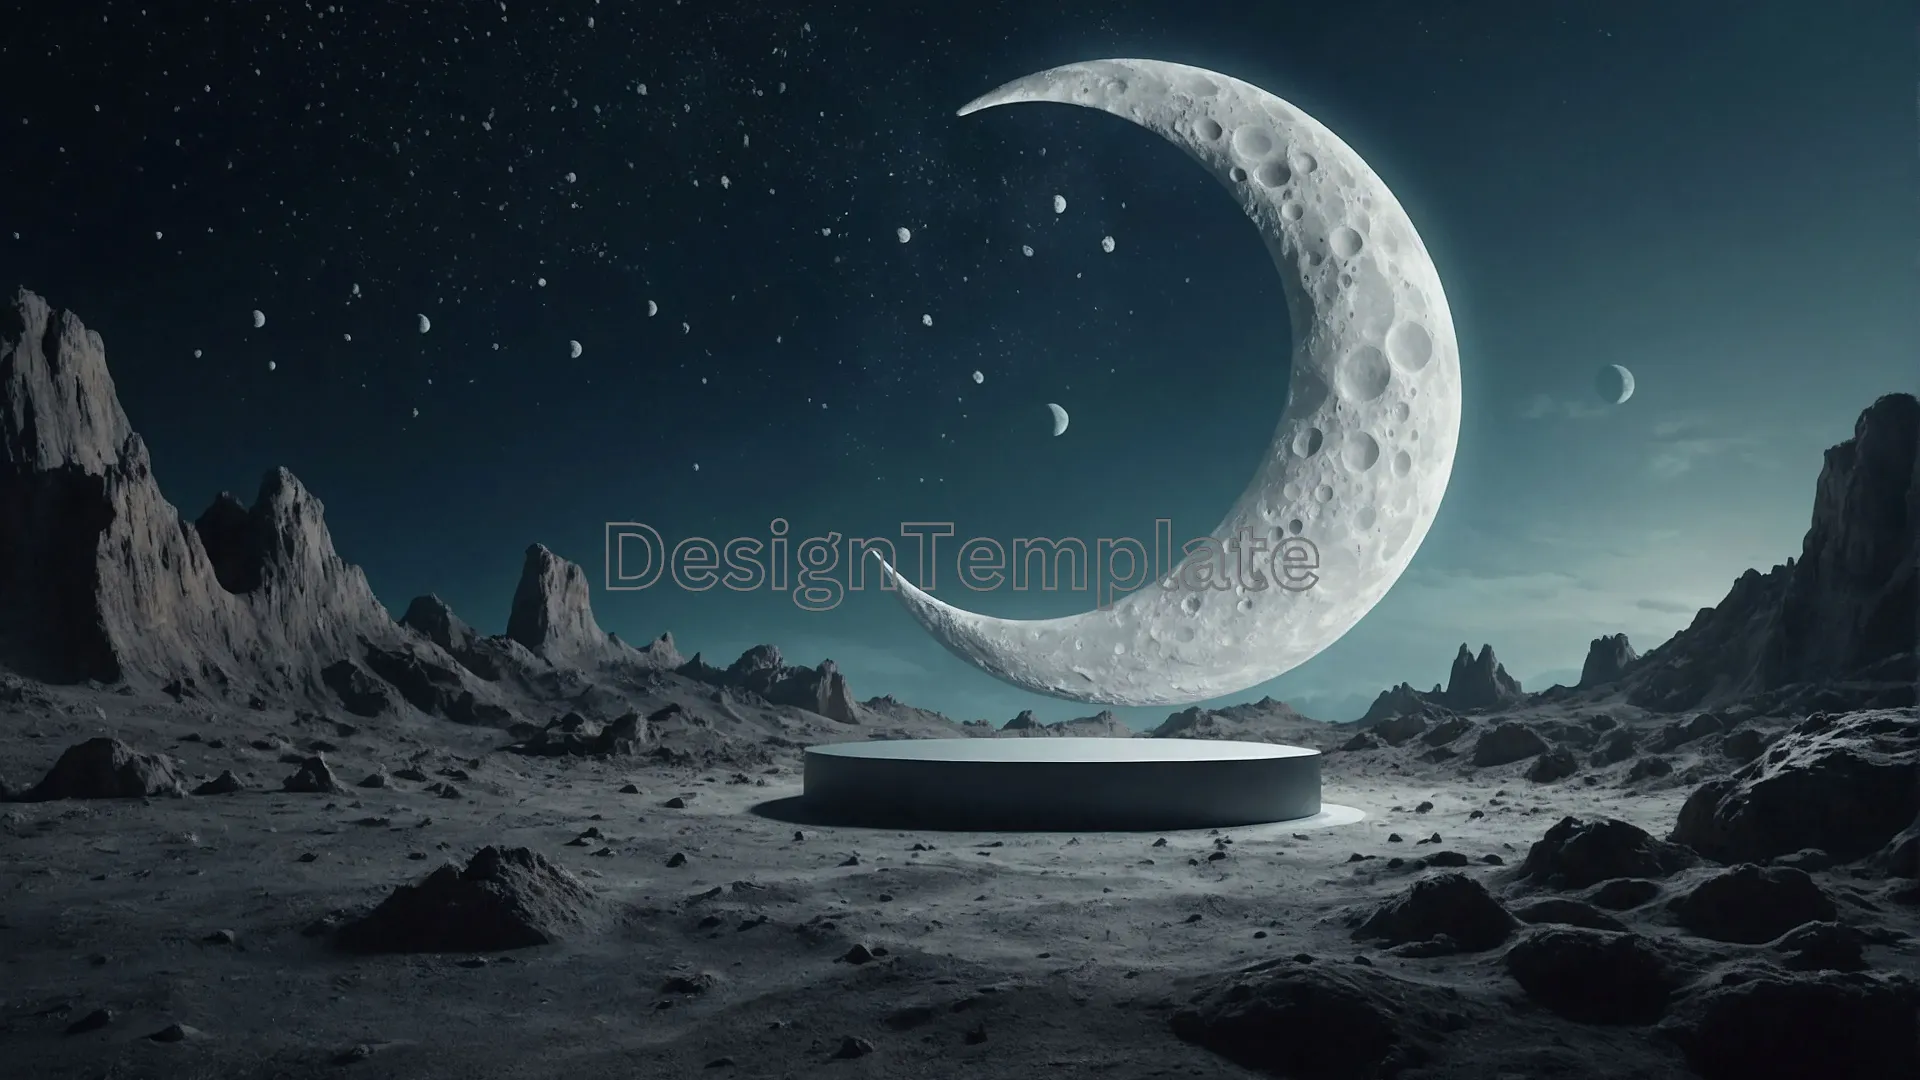 Bright Moon Over Snowy Landscape Background Texture image